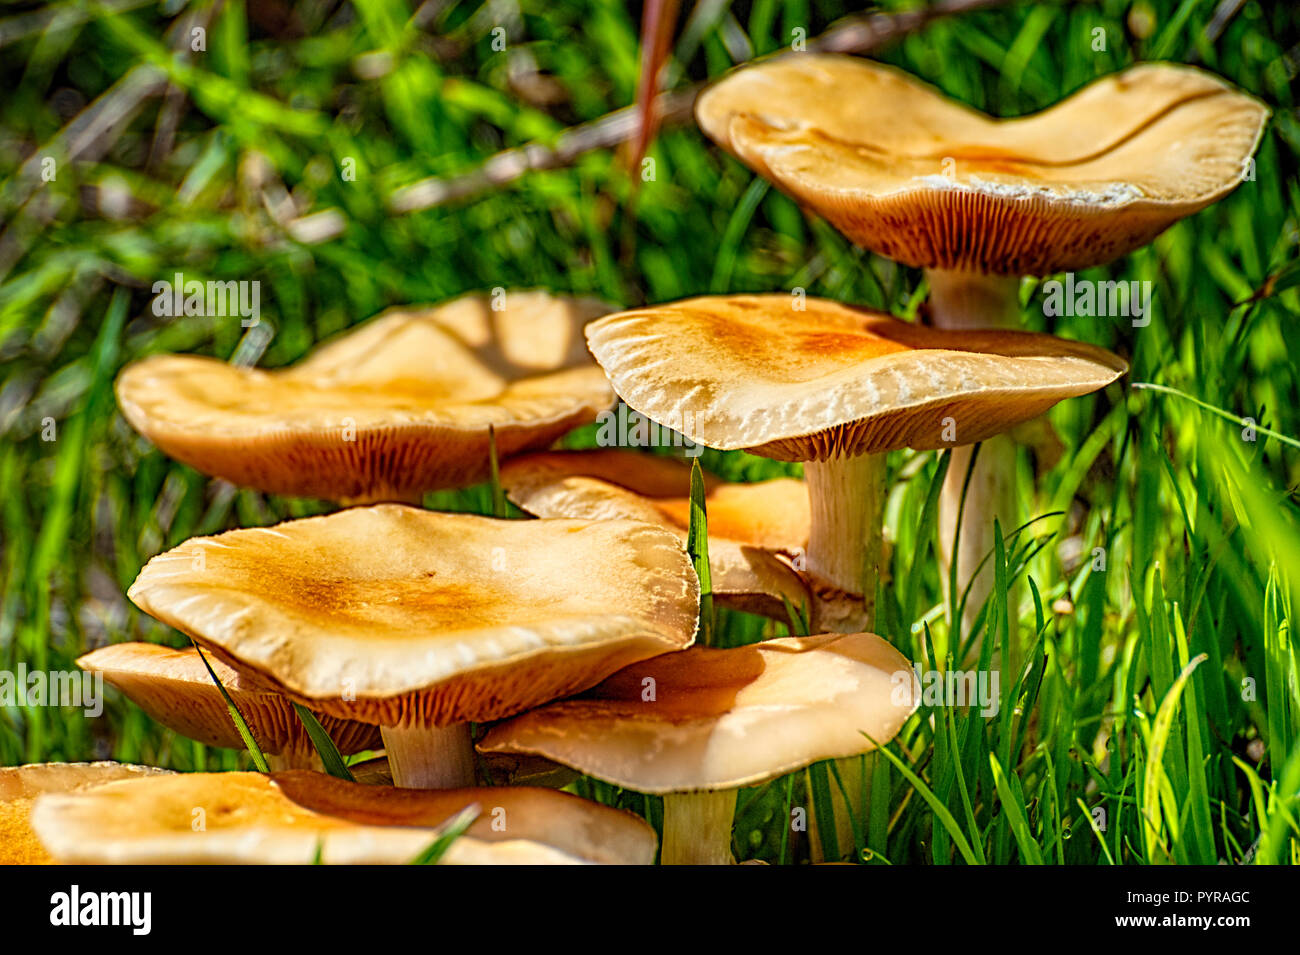 A layer of spring mushroom growing amongst the grass. Stock Photo